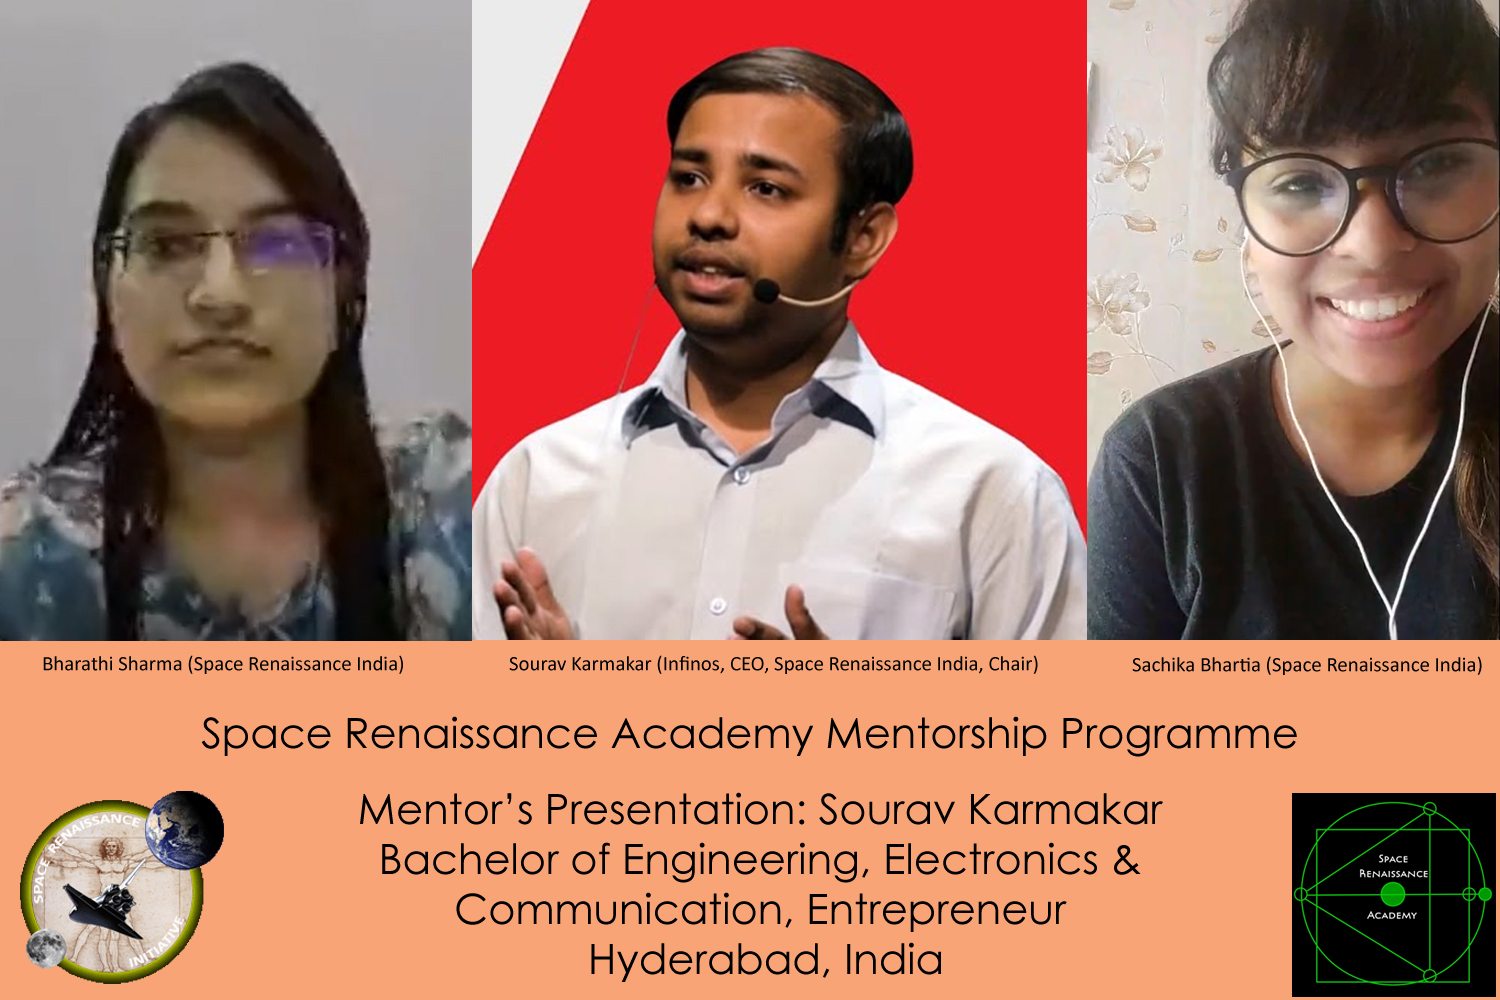 Sourav Karmakar interviewed by Bharathi Sharma and Sachika Bhatia for the Space Renaissance Academy Mentorship Programme